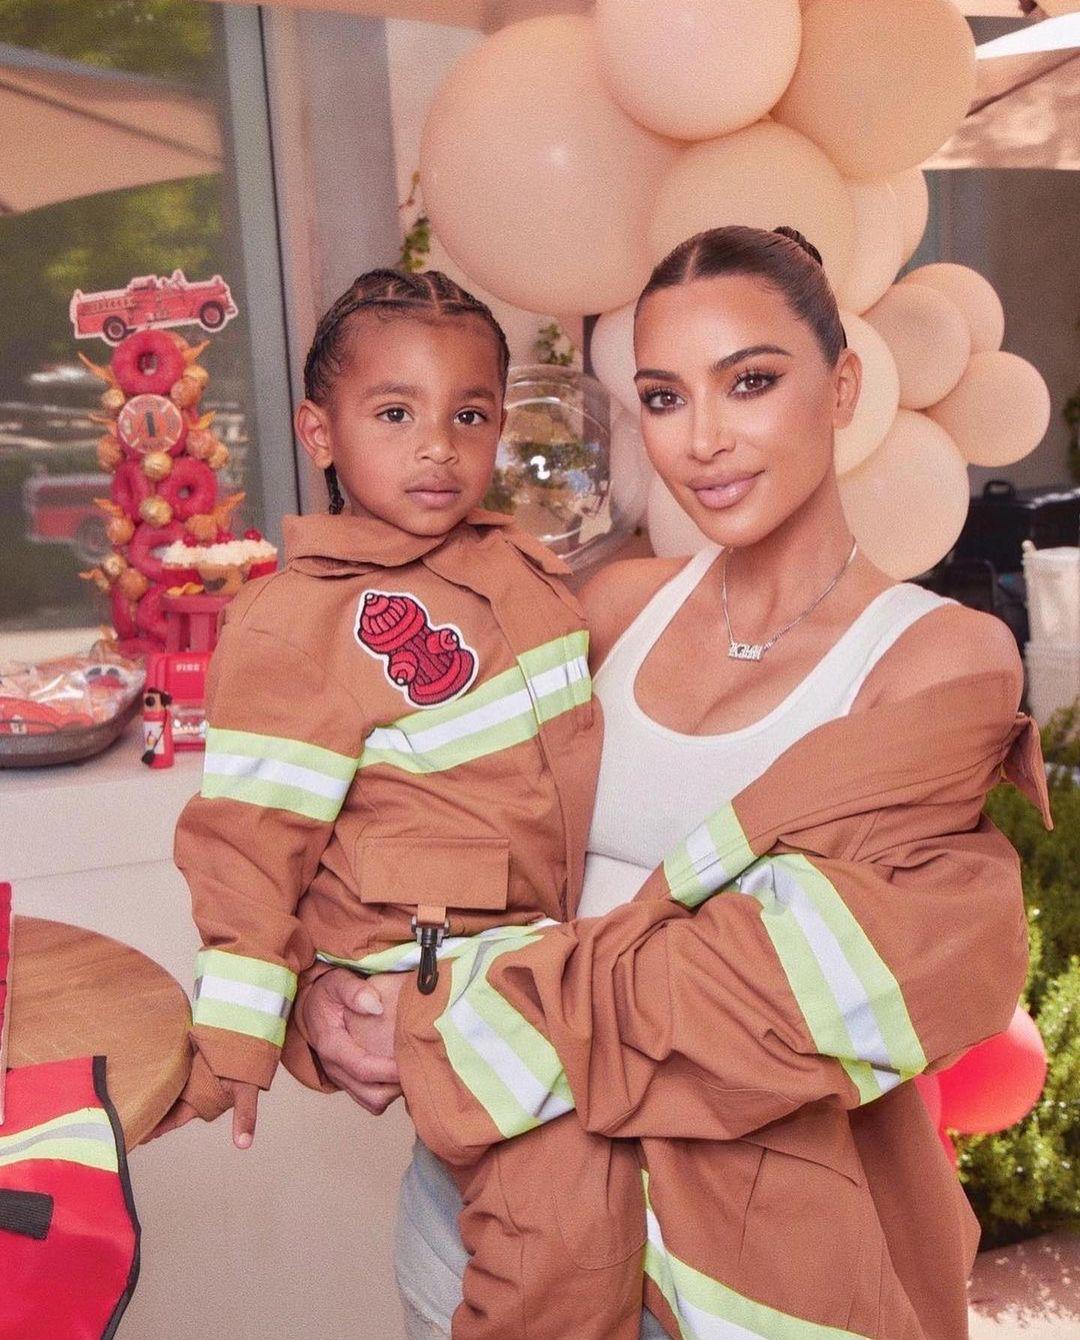 Kim Kardashian Serenades Son Psalm With Sweet Words For His 4th Birthday